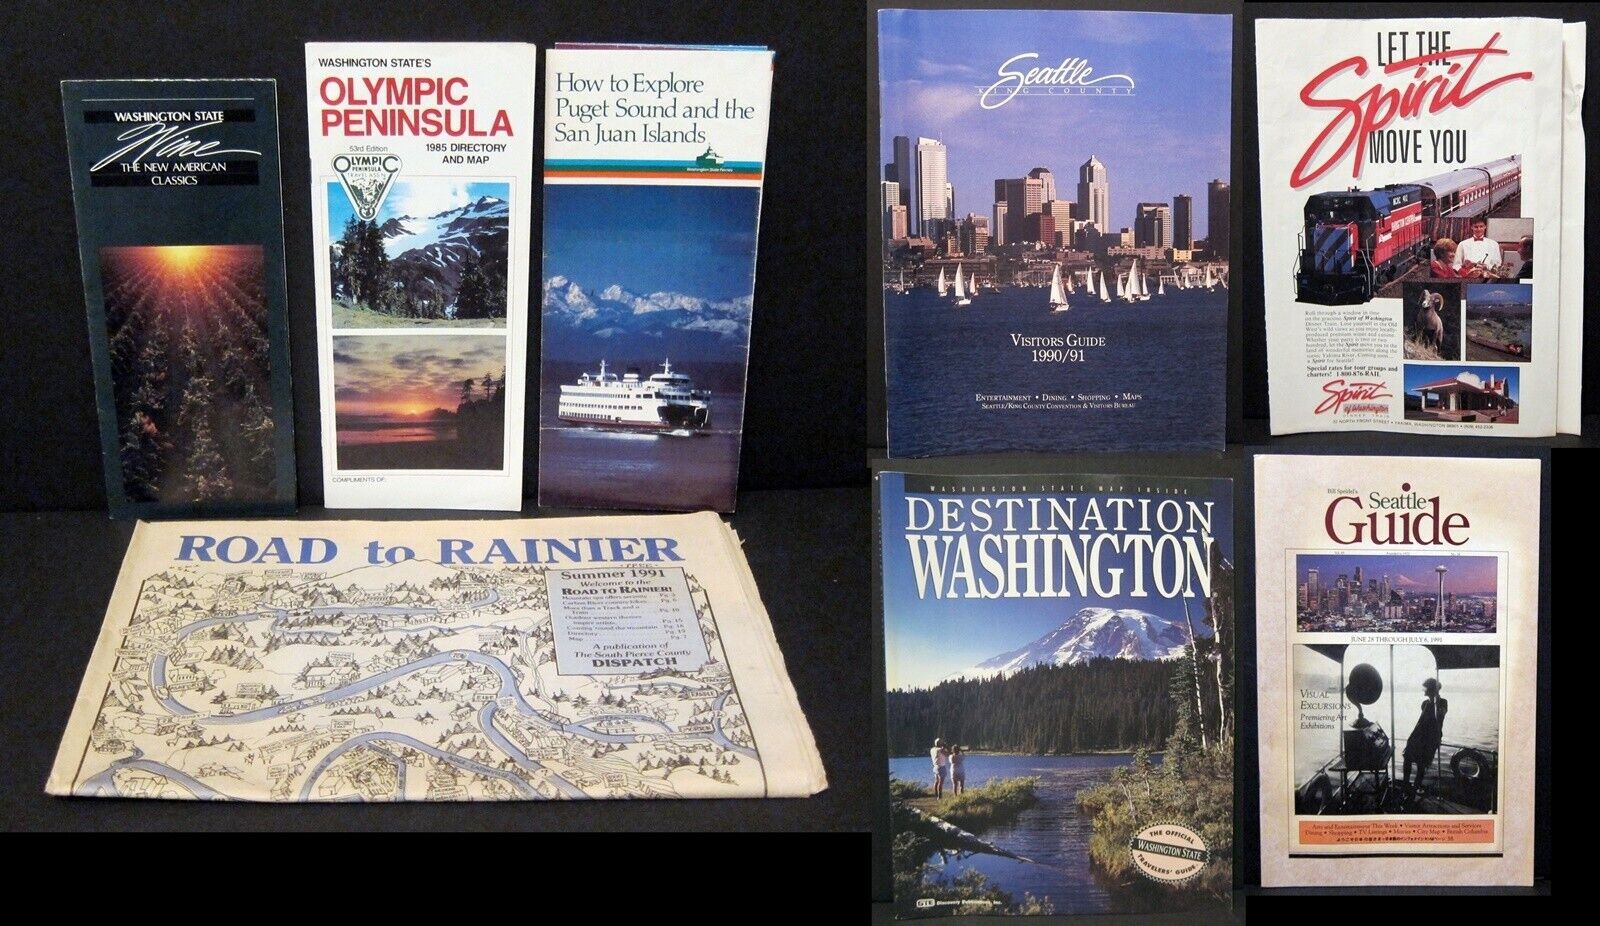 SEATTLE and WASHINGTON TOURIST VISITOR INFO - 8 PIECES - Early 1990's